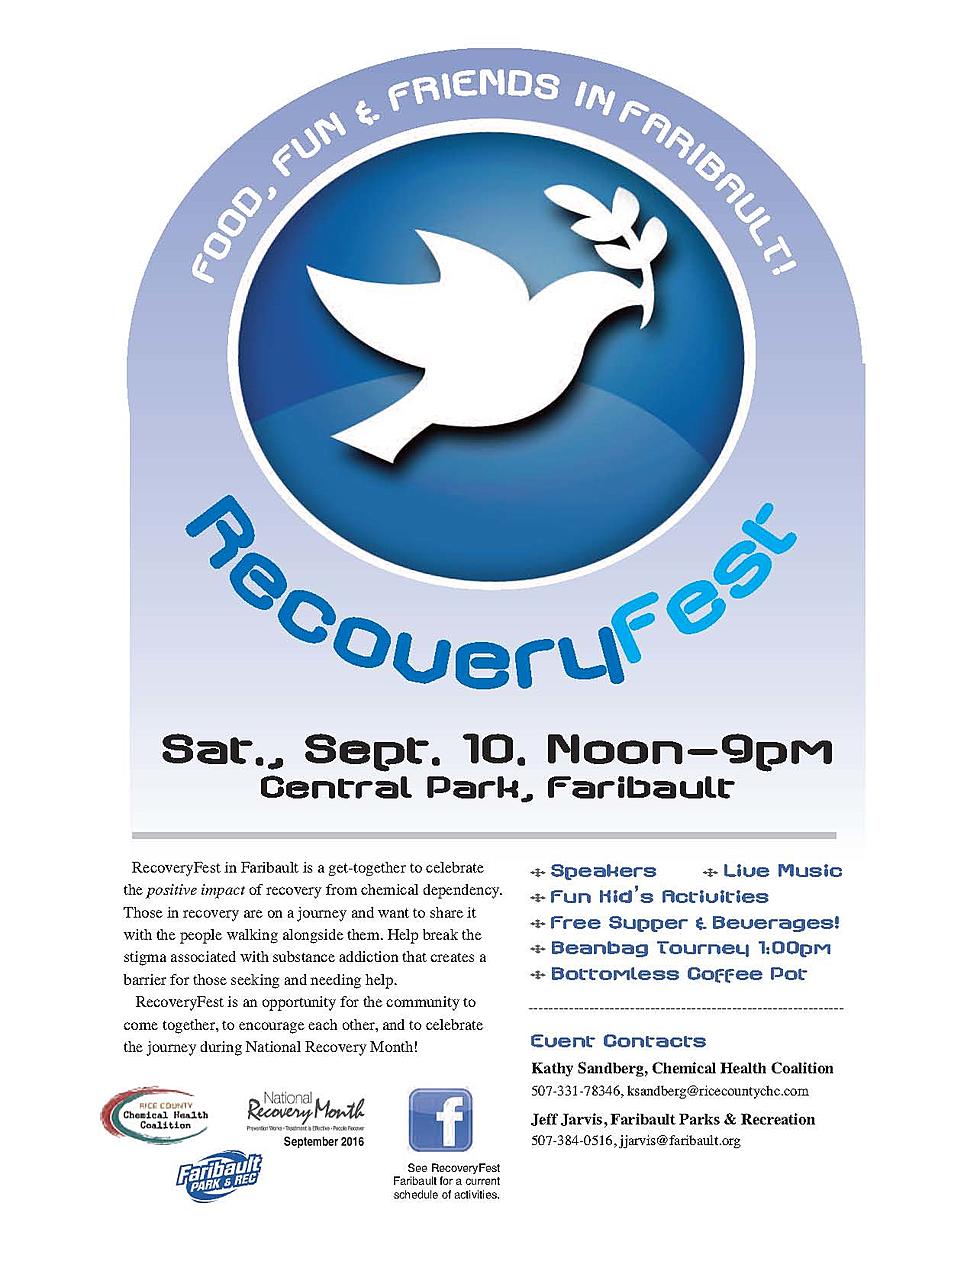 Family Fun at RecoveryFest this Saturday